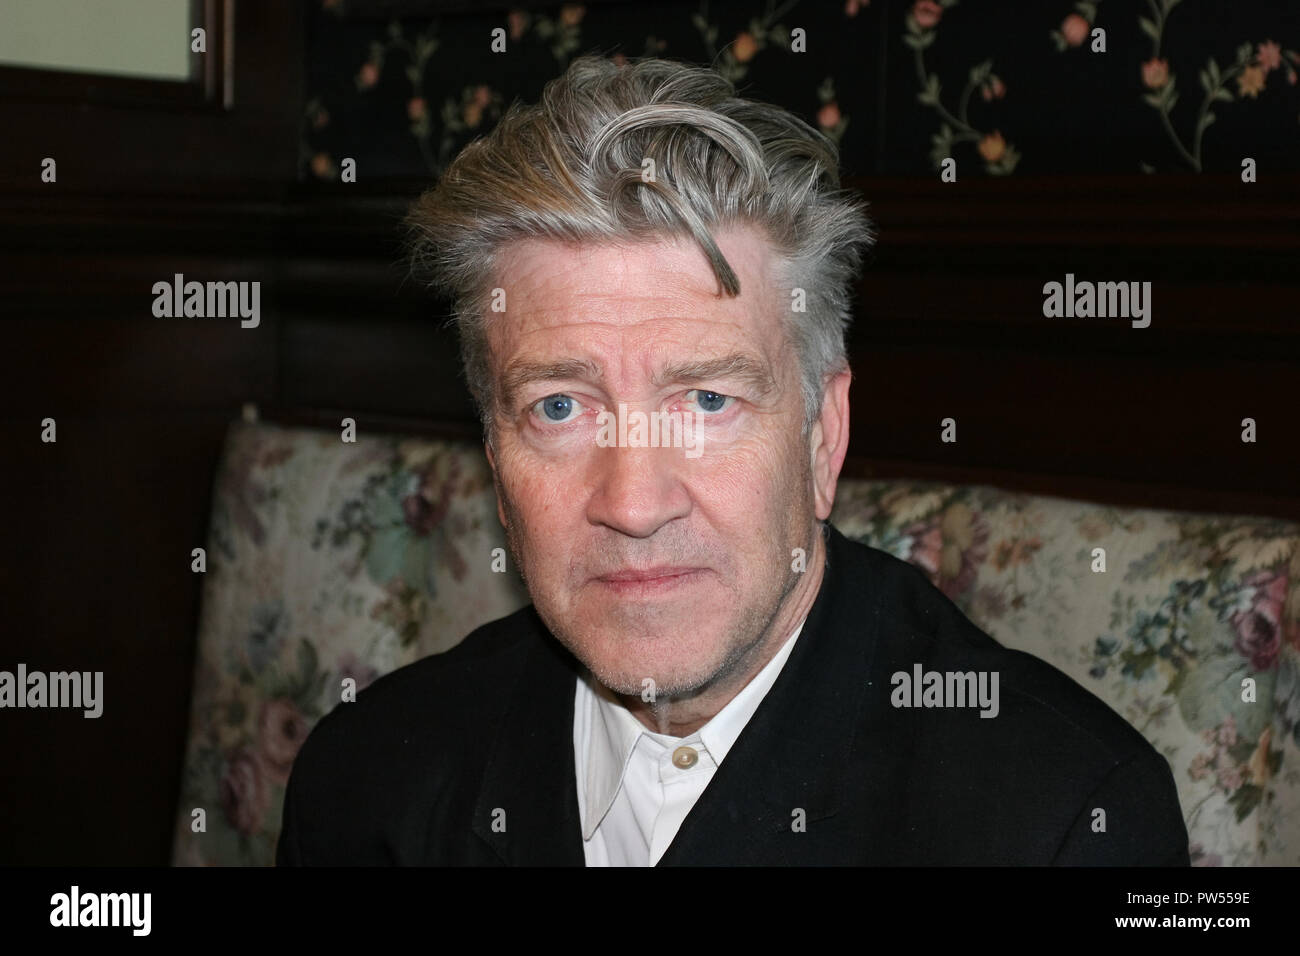 David Lynch  12/07/06  INLAND EMPIRE junket @ Marie Calendar's, Los Angeles Photo by Izumi Hasegawa/HNW / PictureLux  File Reference # 33683 219HNWPLX Stock Photo